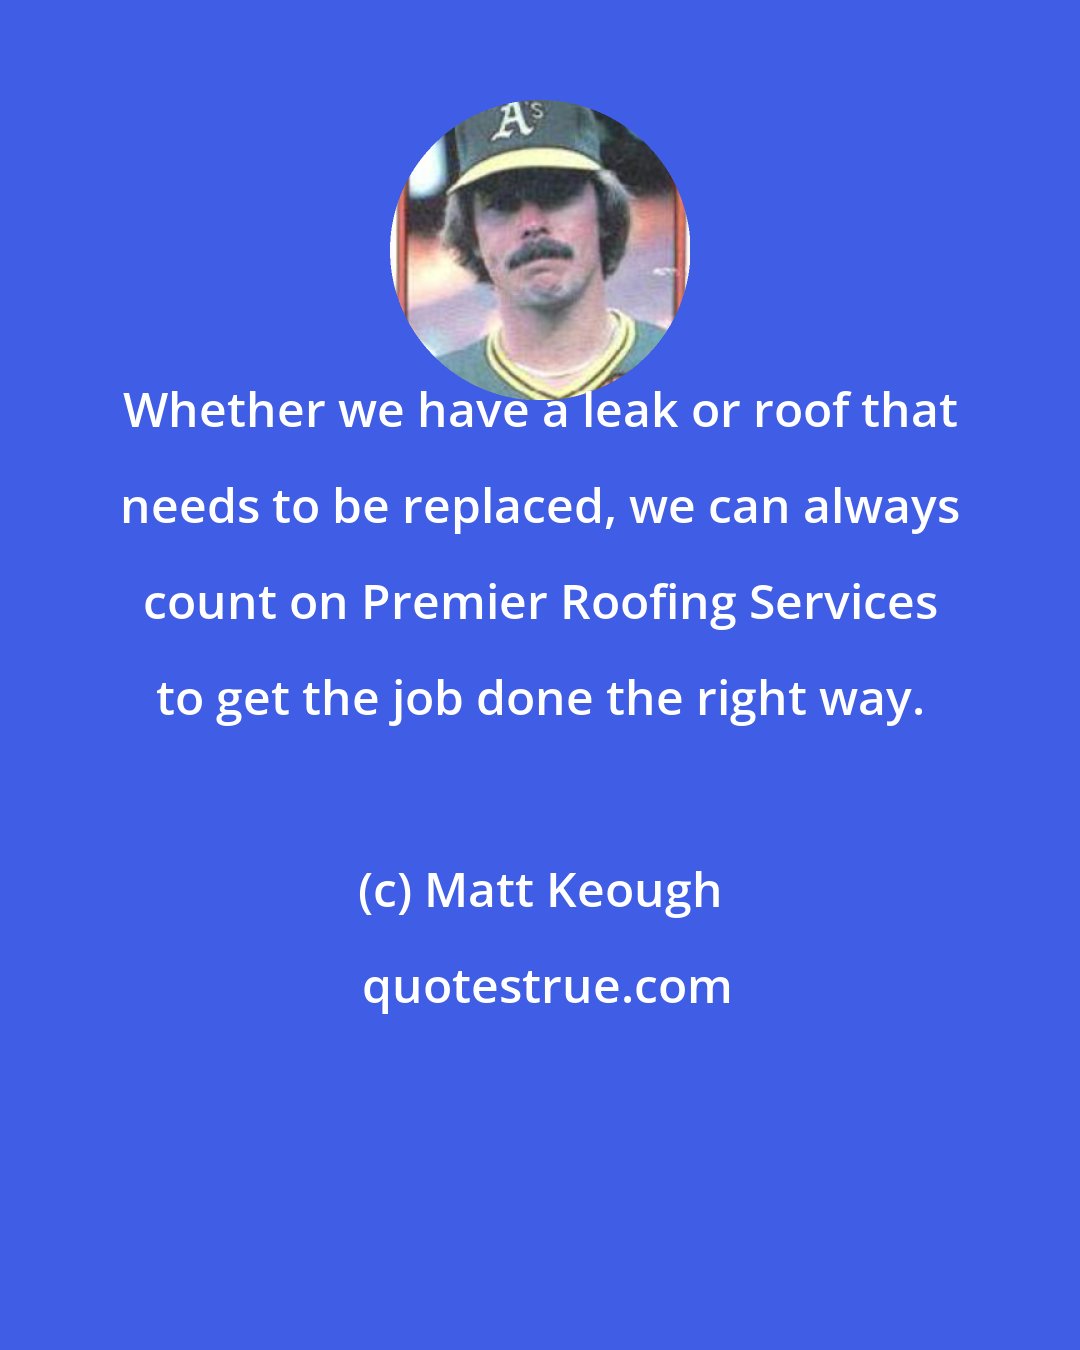 Matt Keough: Whether we have a leak or roof that needs to be replaced, we can always count on Premier Roofing Services to get the job done the right way.